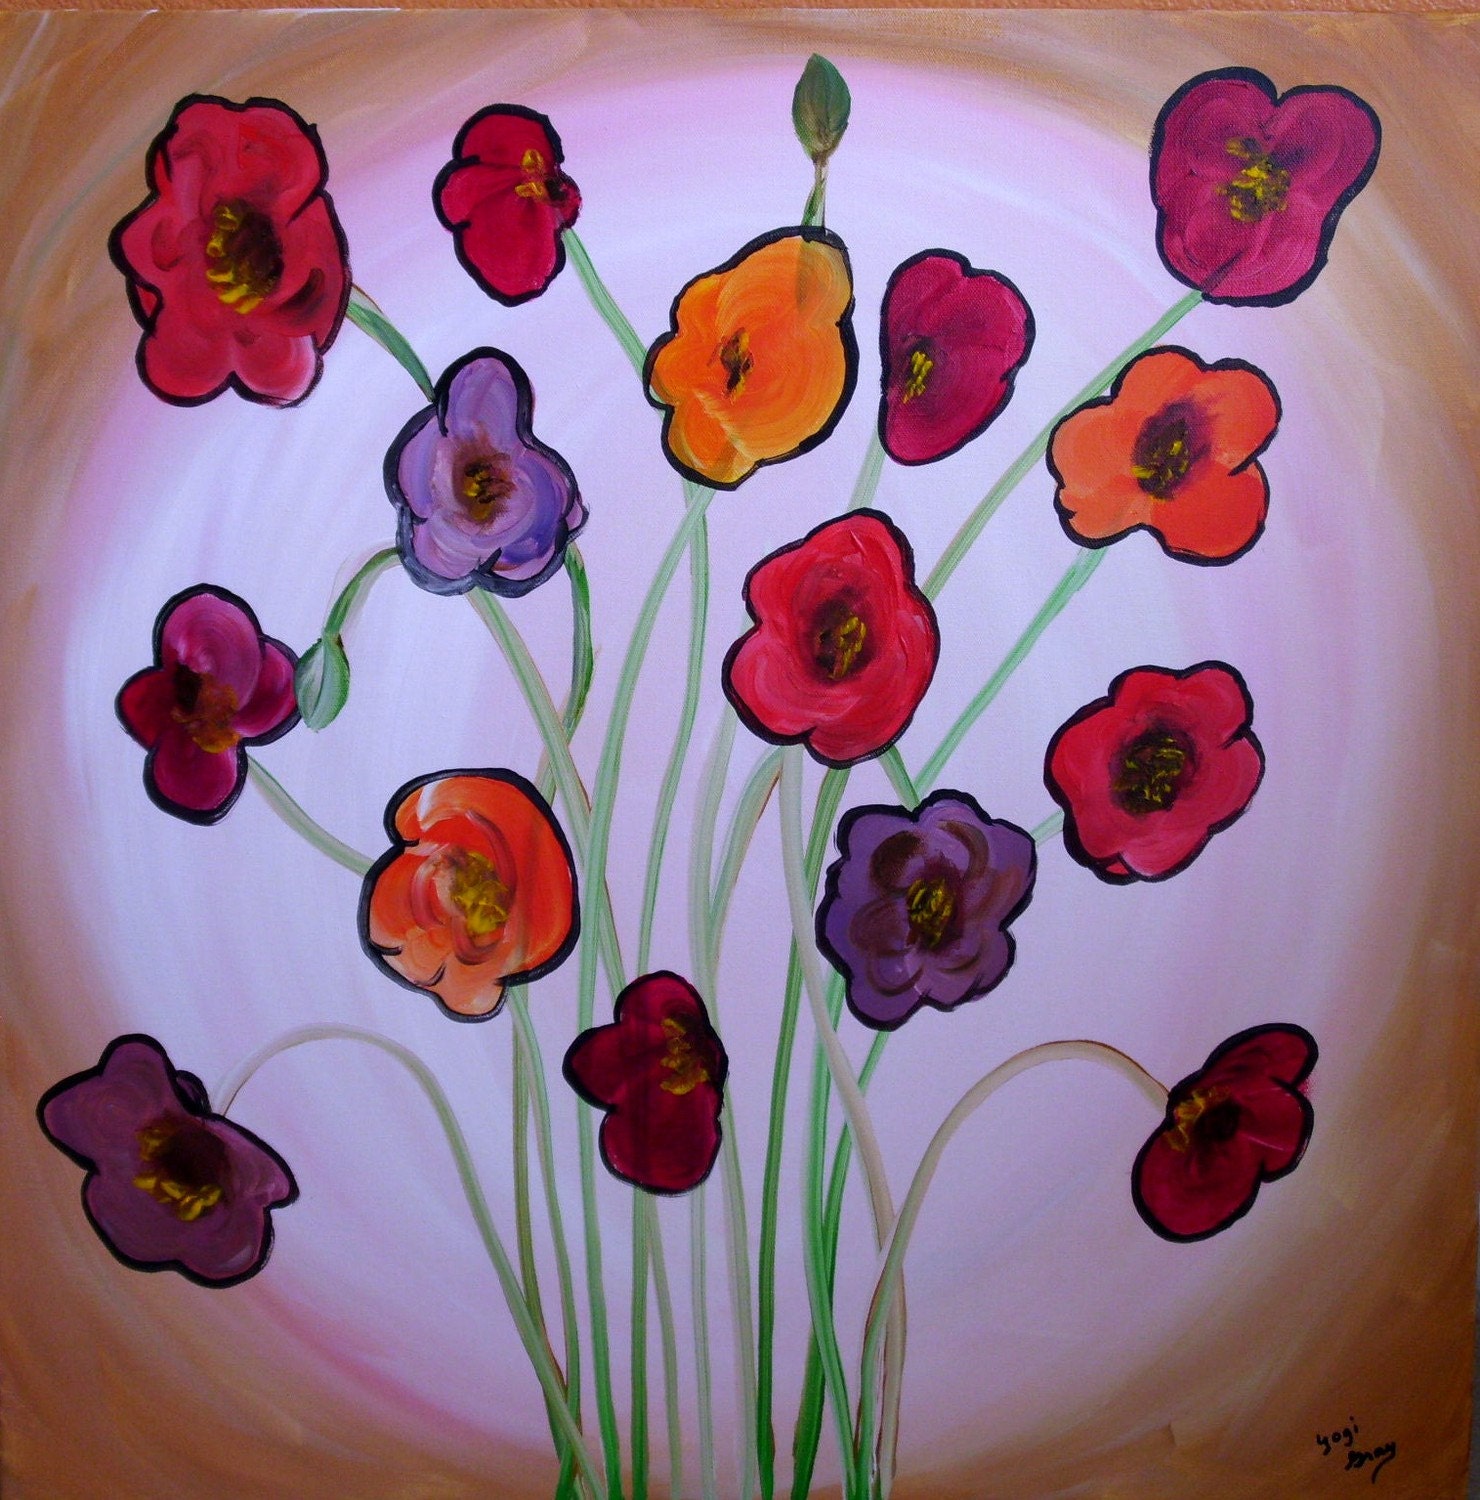 Plate of Poppies Original Painting on Canvas 24x24